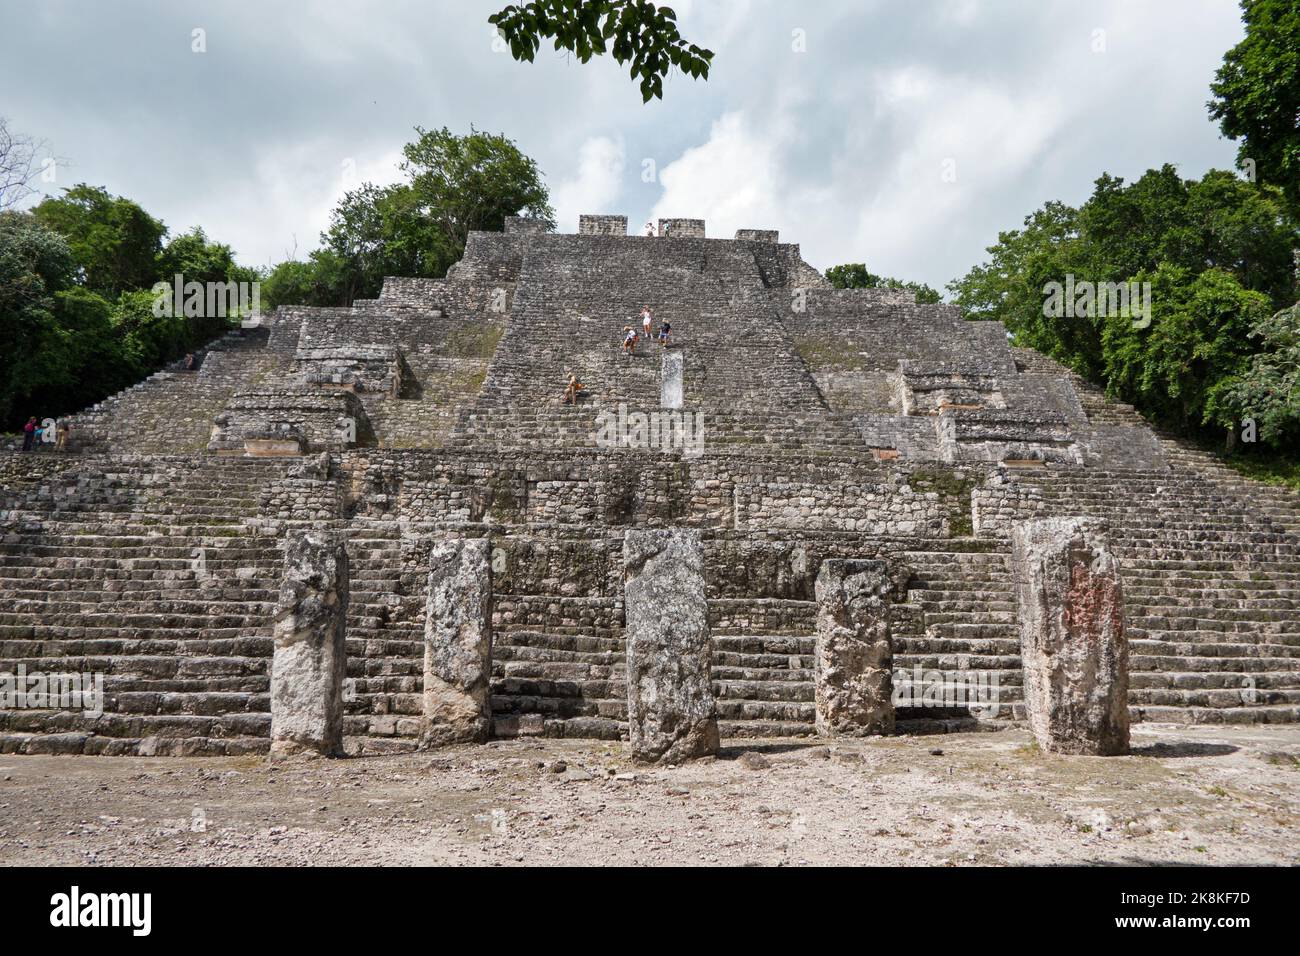 View of Calakmul, a Maya archaeological site deep in the jungles of the Mexican state of Campeche. The pyramid known as Structure 2 (or Structure II) Stock Photo